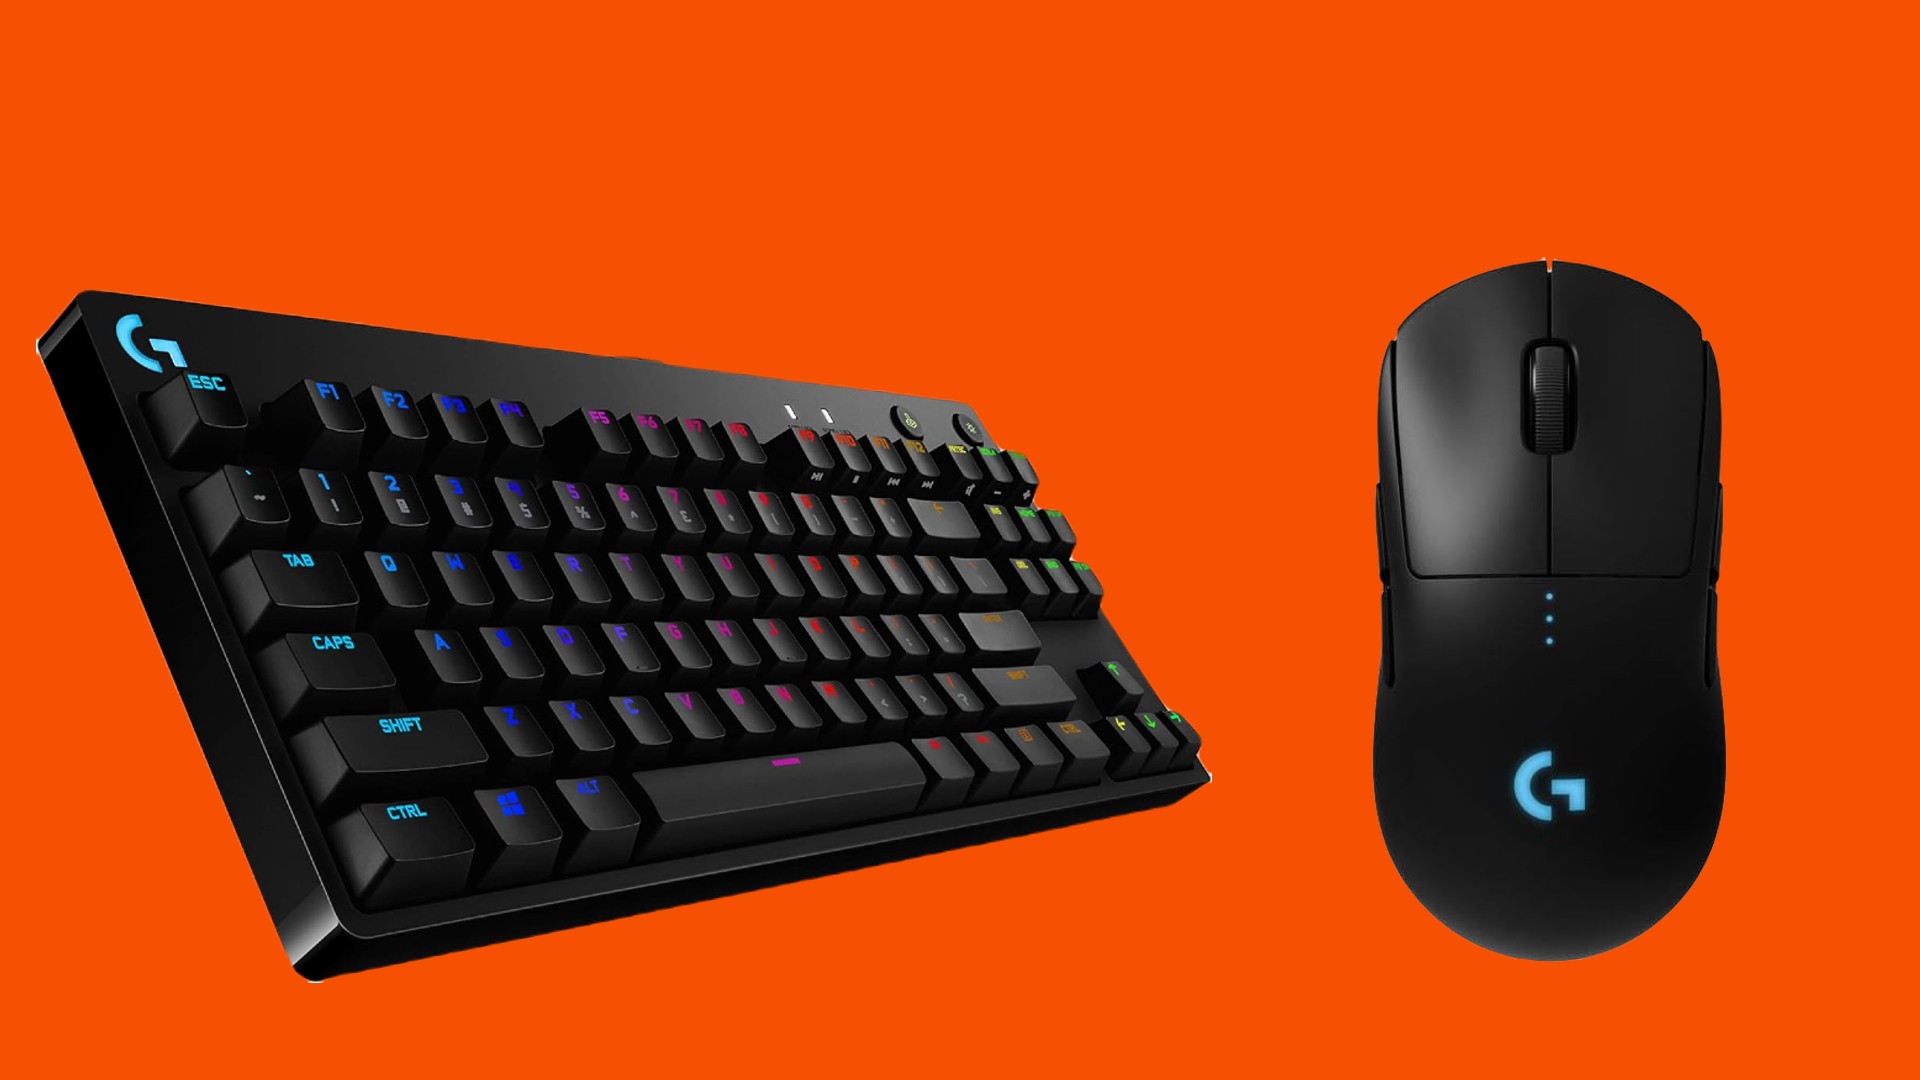 Act fast to get 34% off this Logitech gaming mouse and keyboard